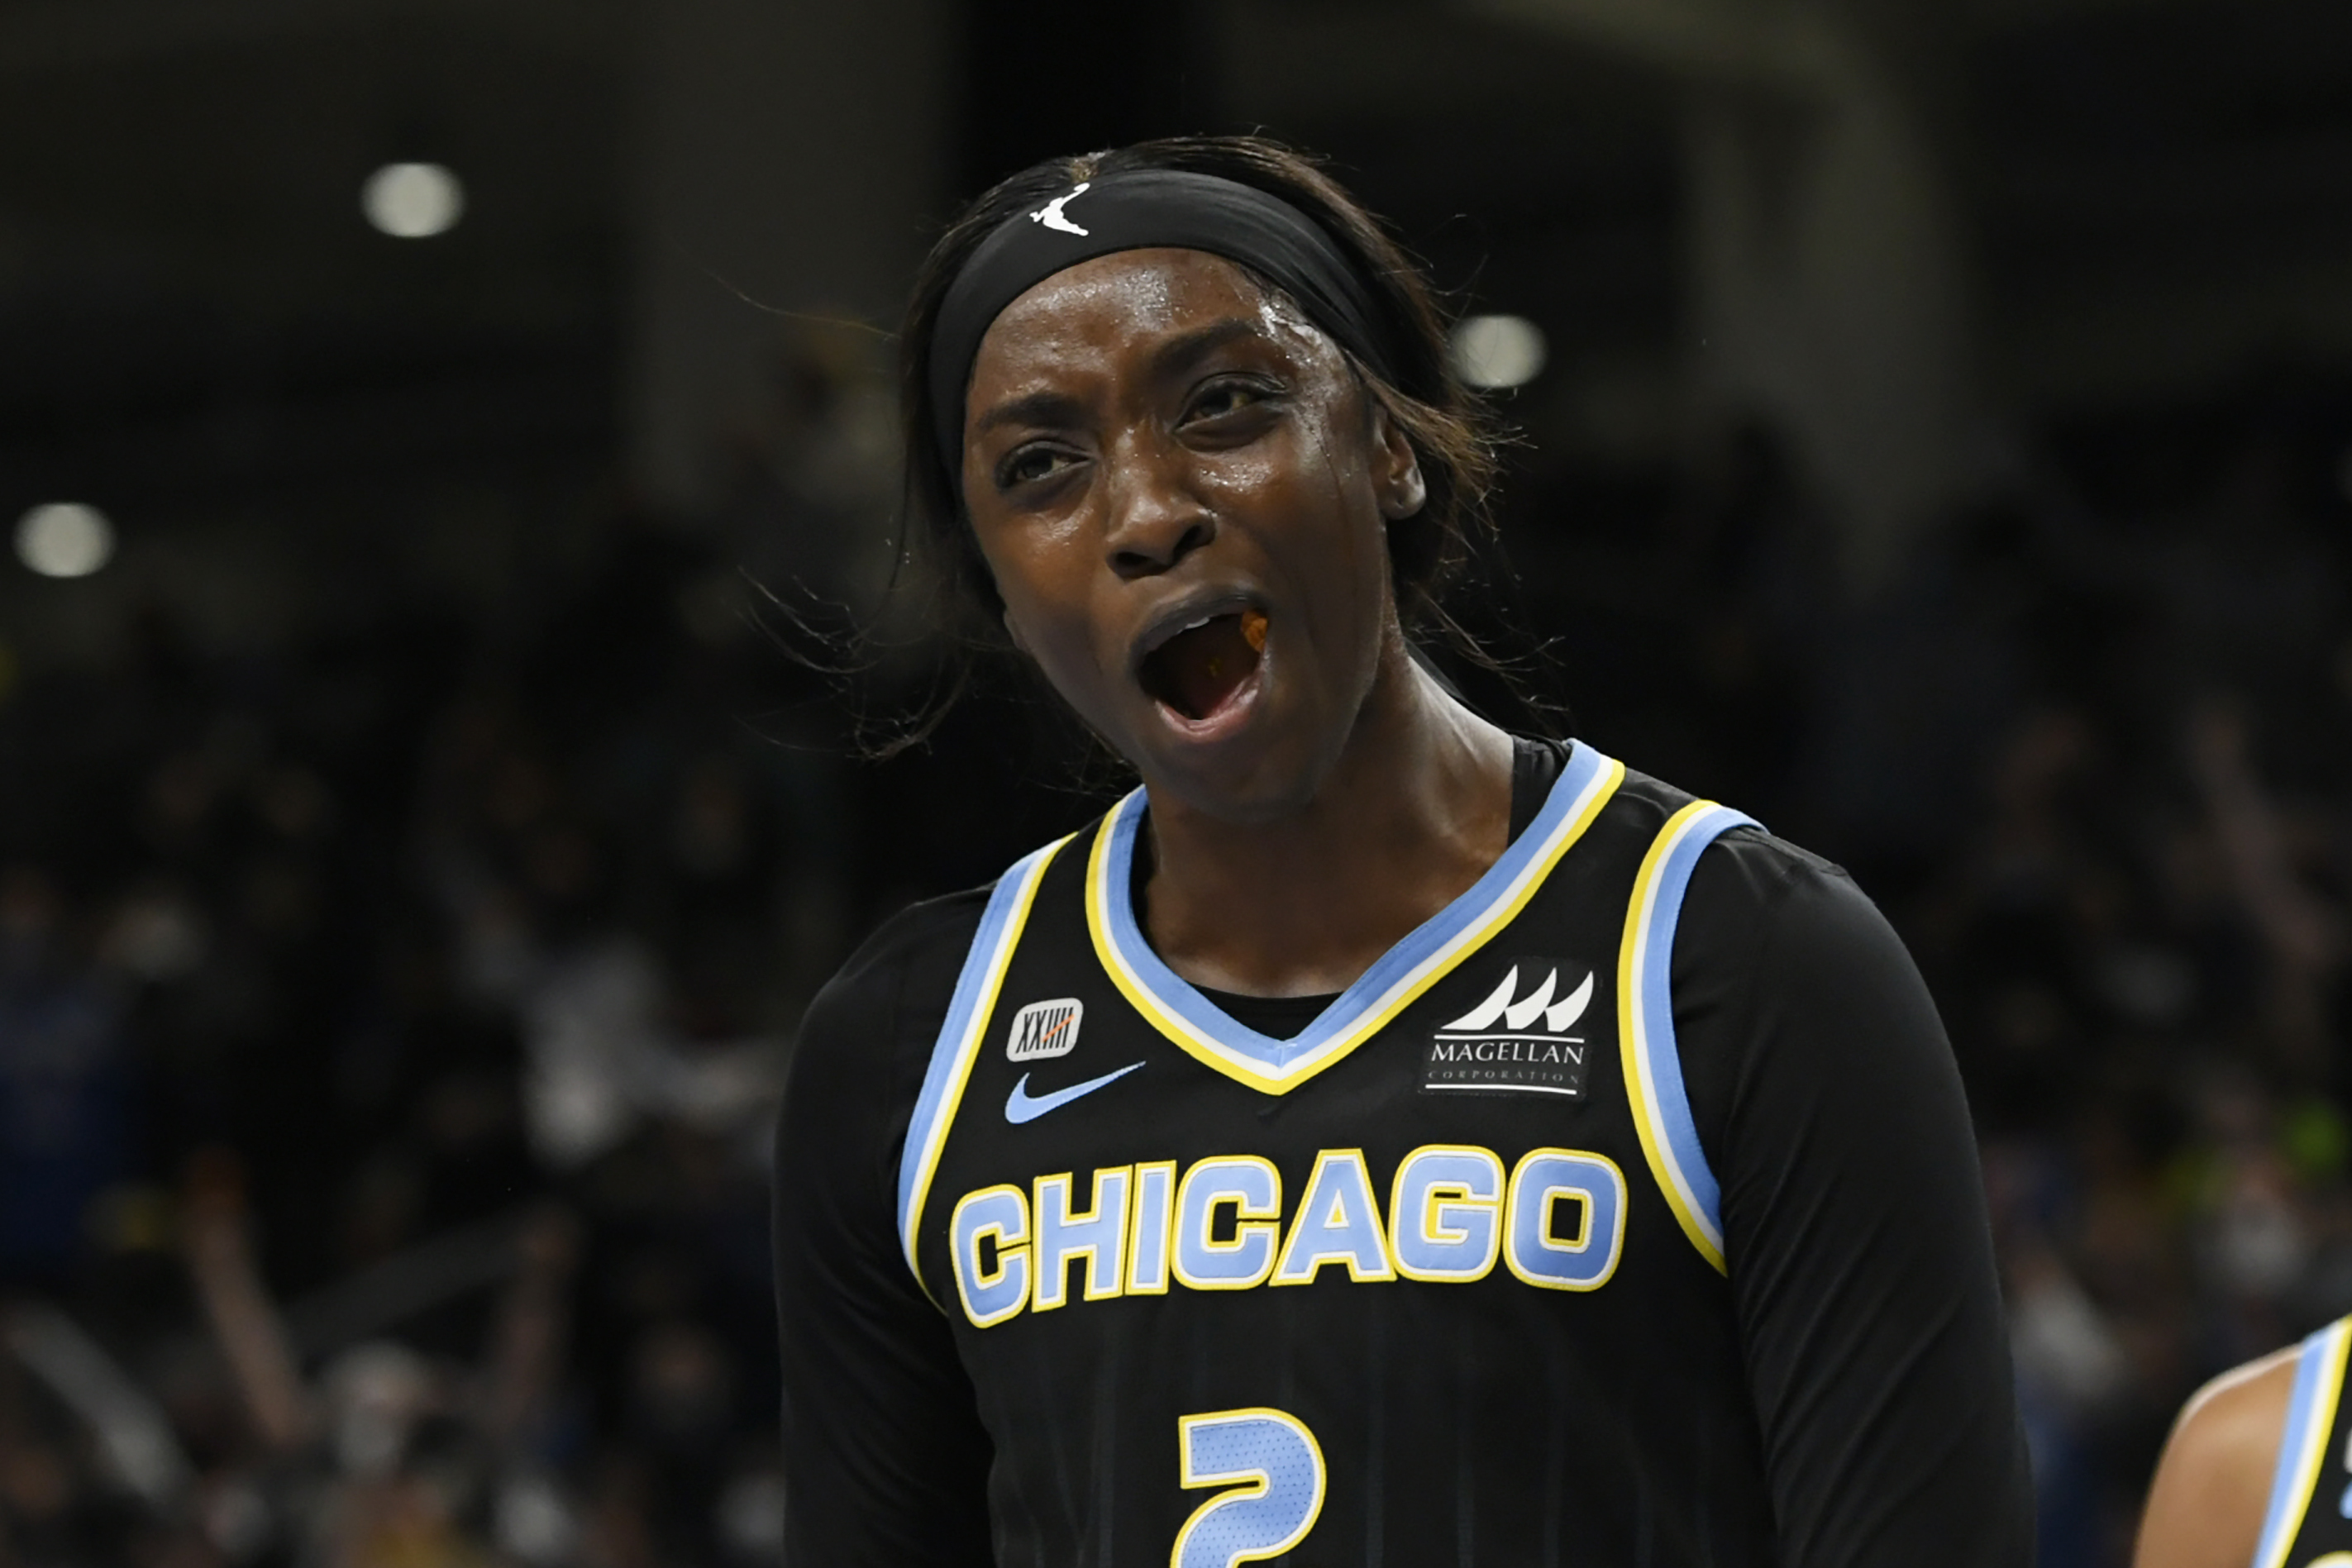 Reshuffle the Deck: Your new look at WNBA's Chicago Sky, Sports